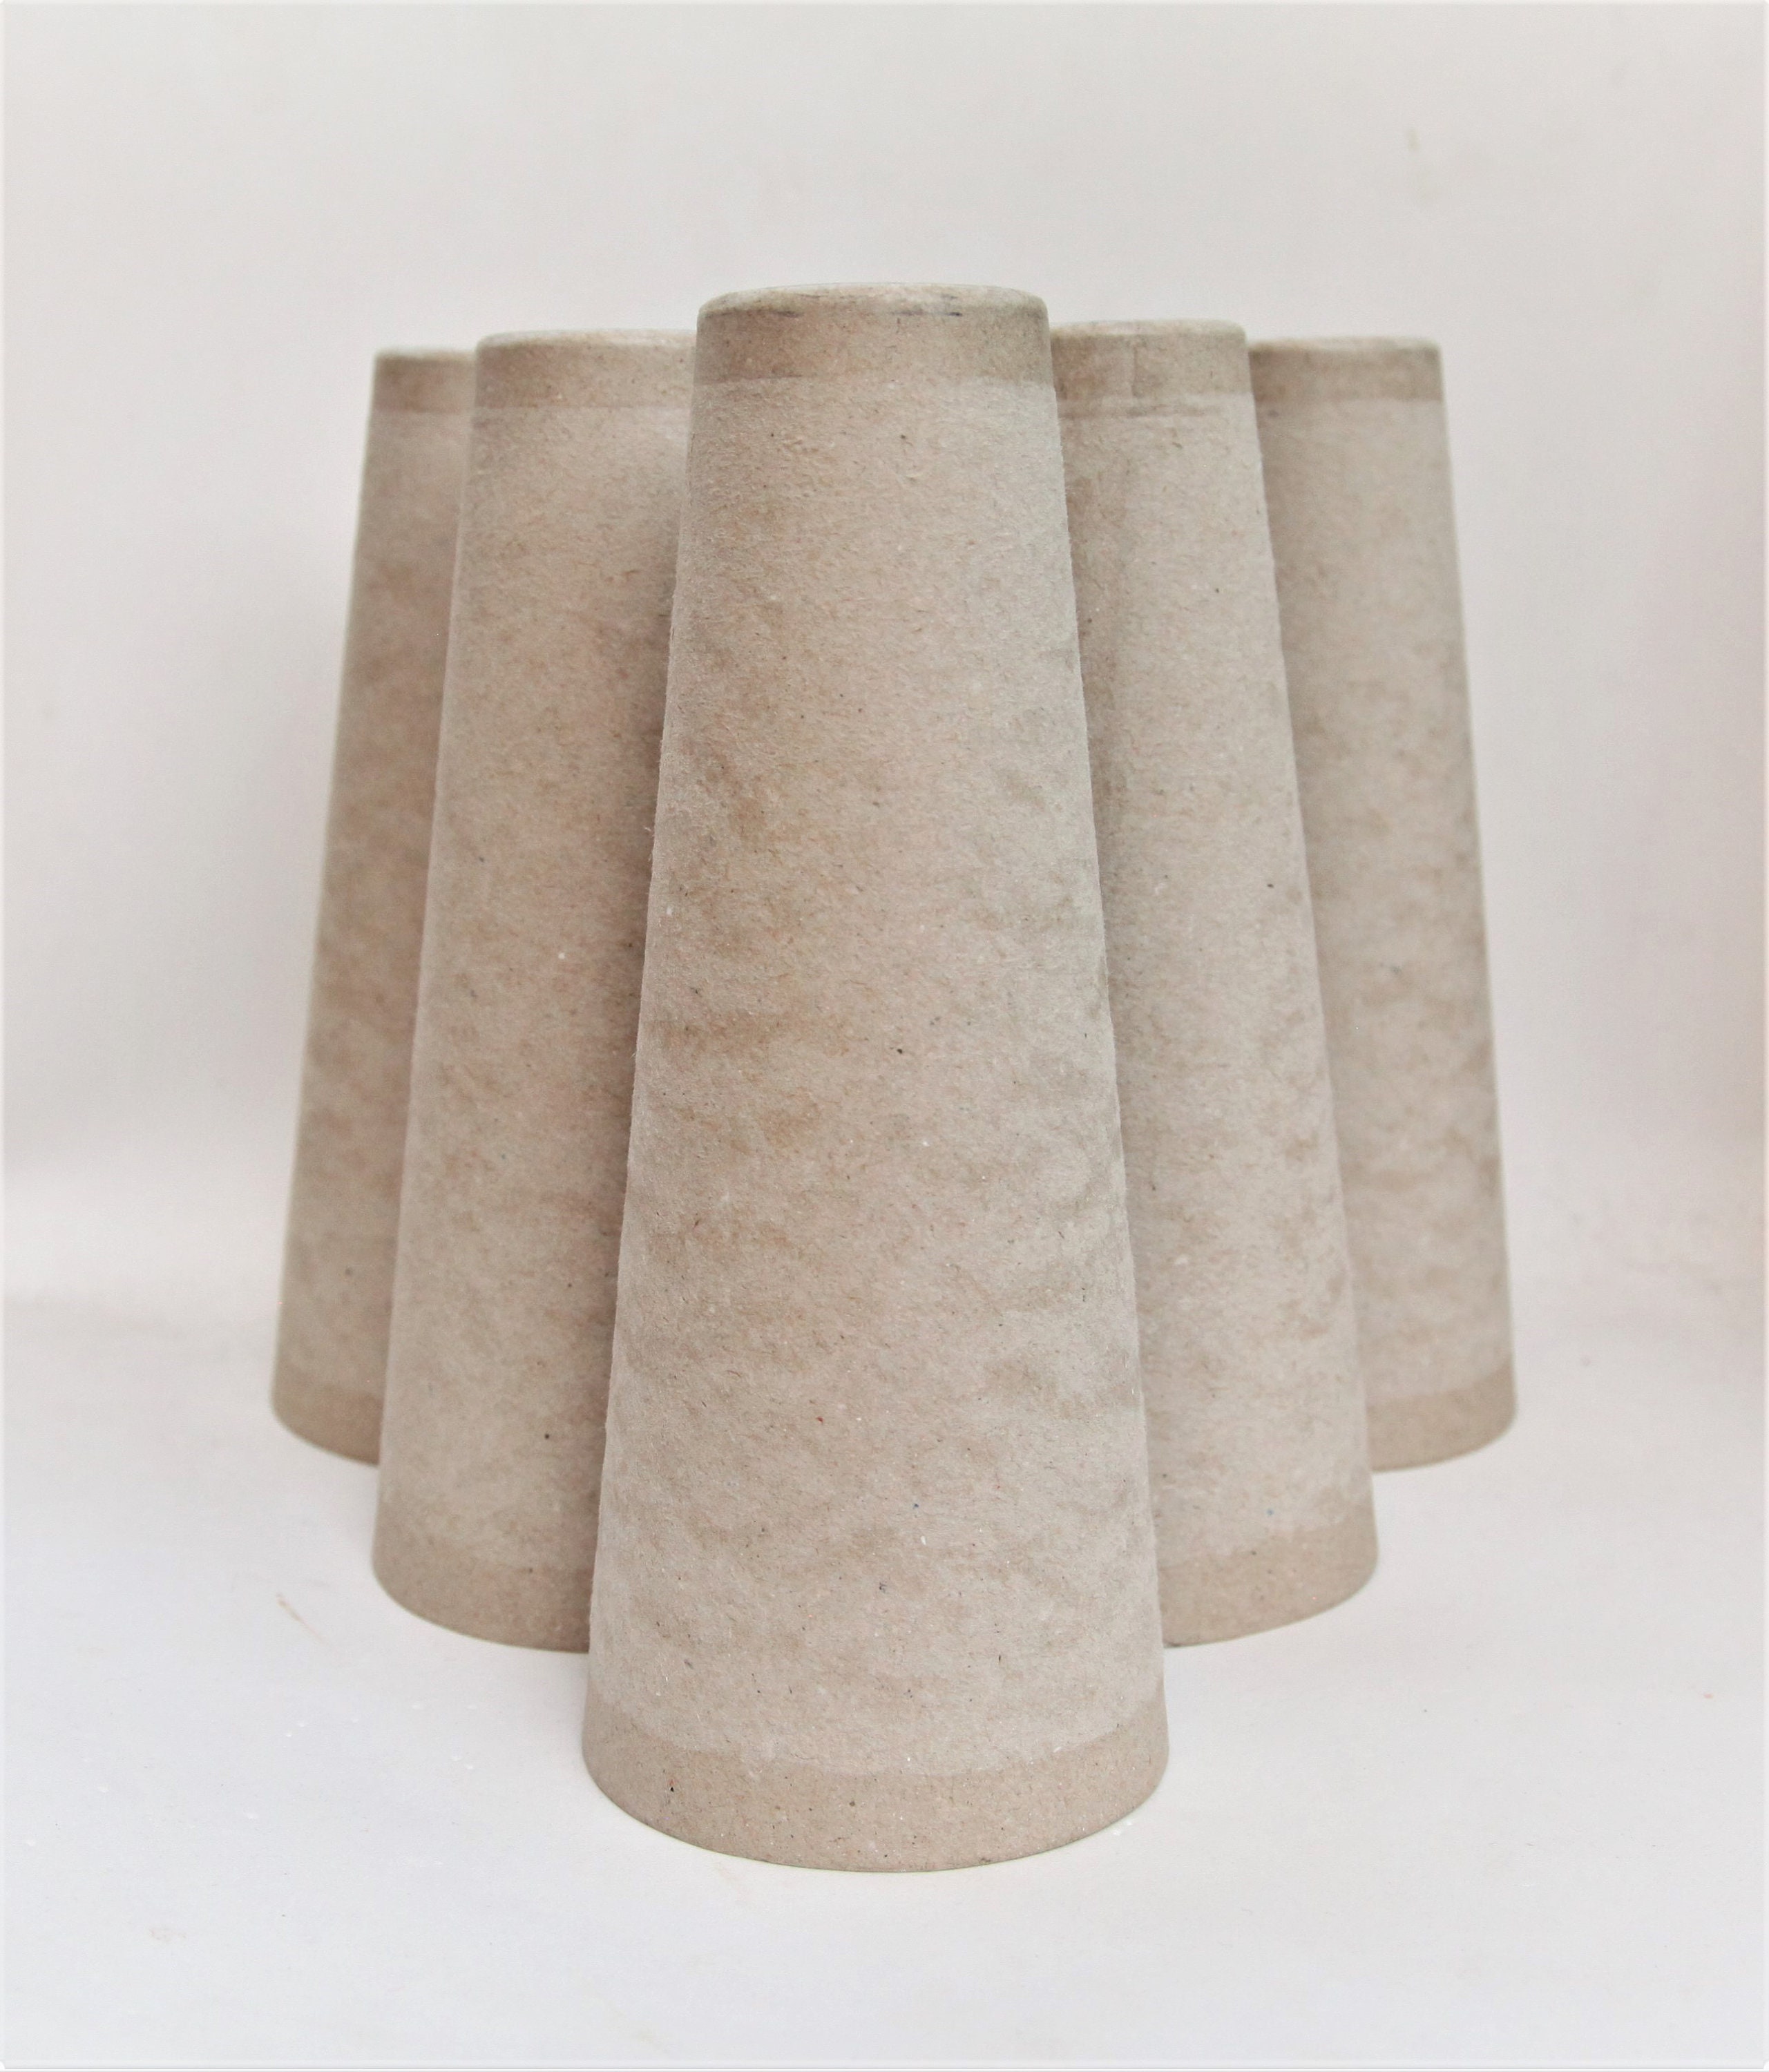 Cardboard cones lot of 10 pcs, yarn cones for winding, thick paperboard  cones, craft cones, paper mache cone, tree shape